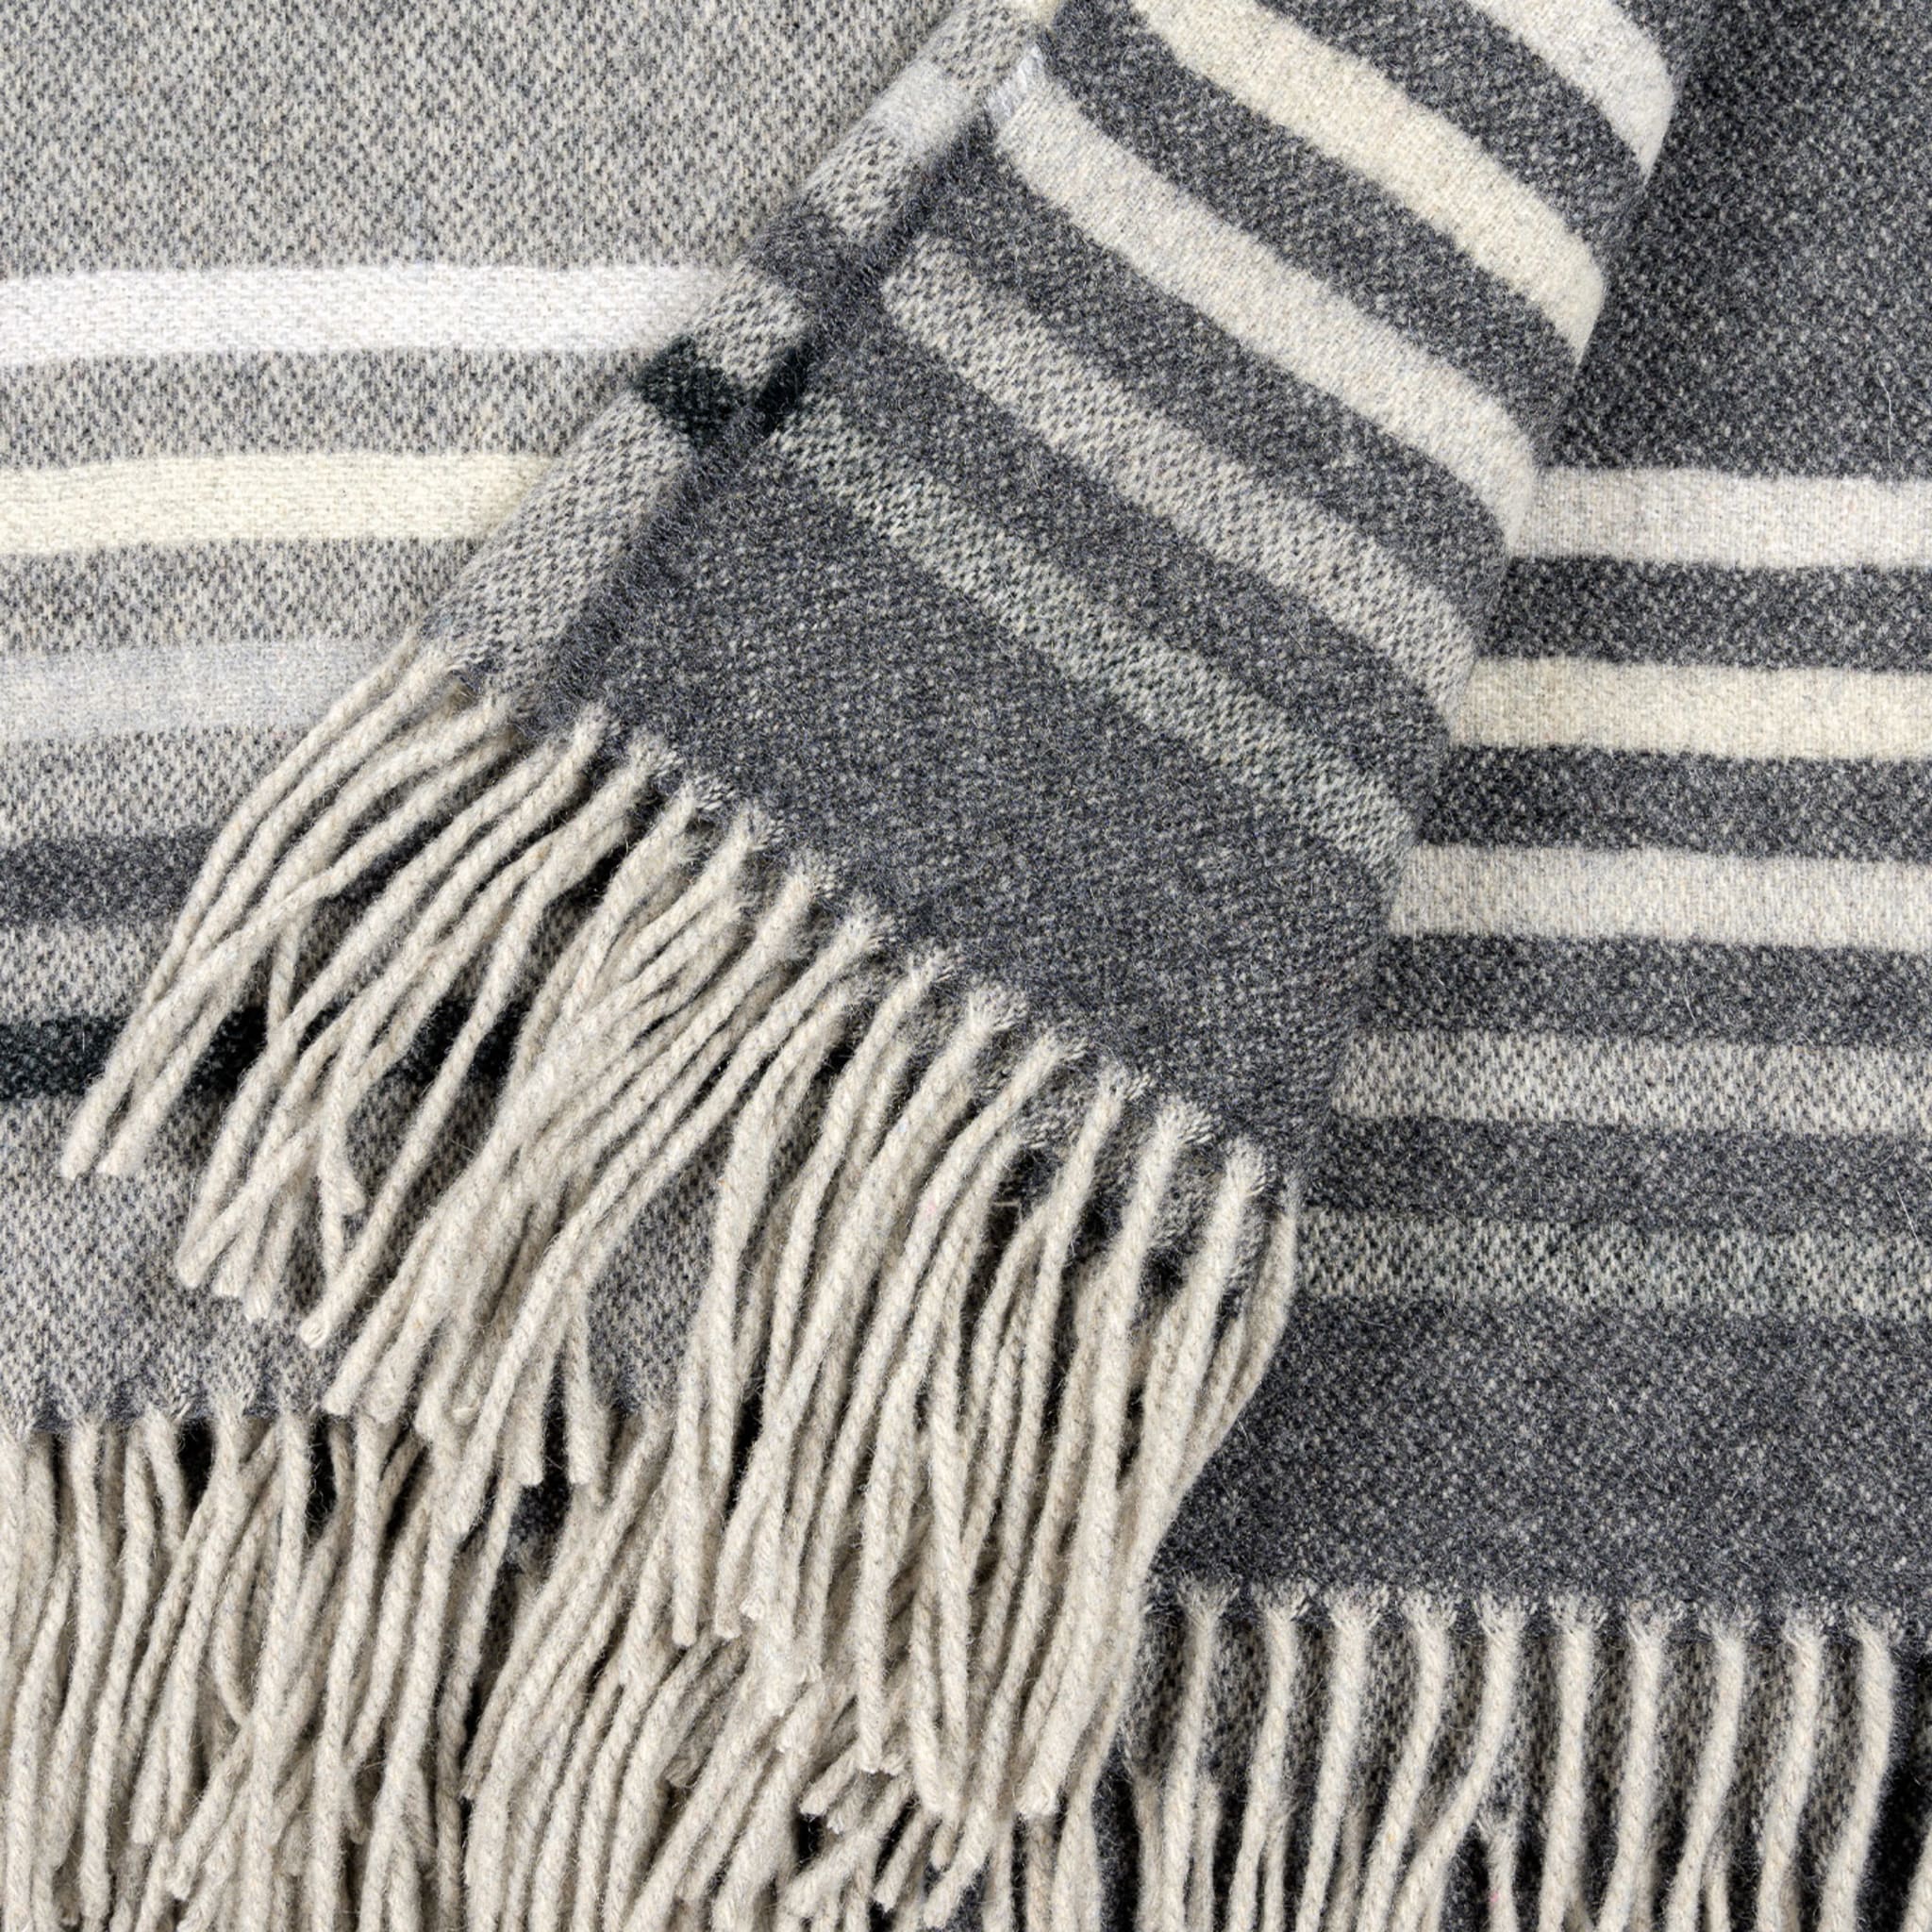 Tailor Gray Small Blanket - Alternative view 4